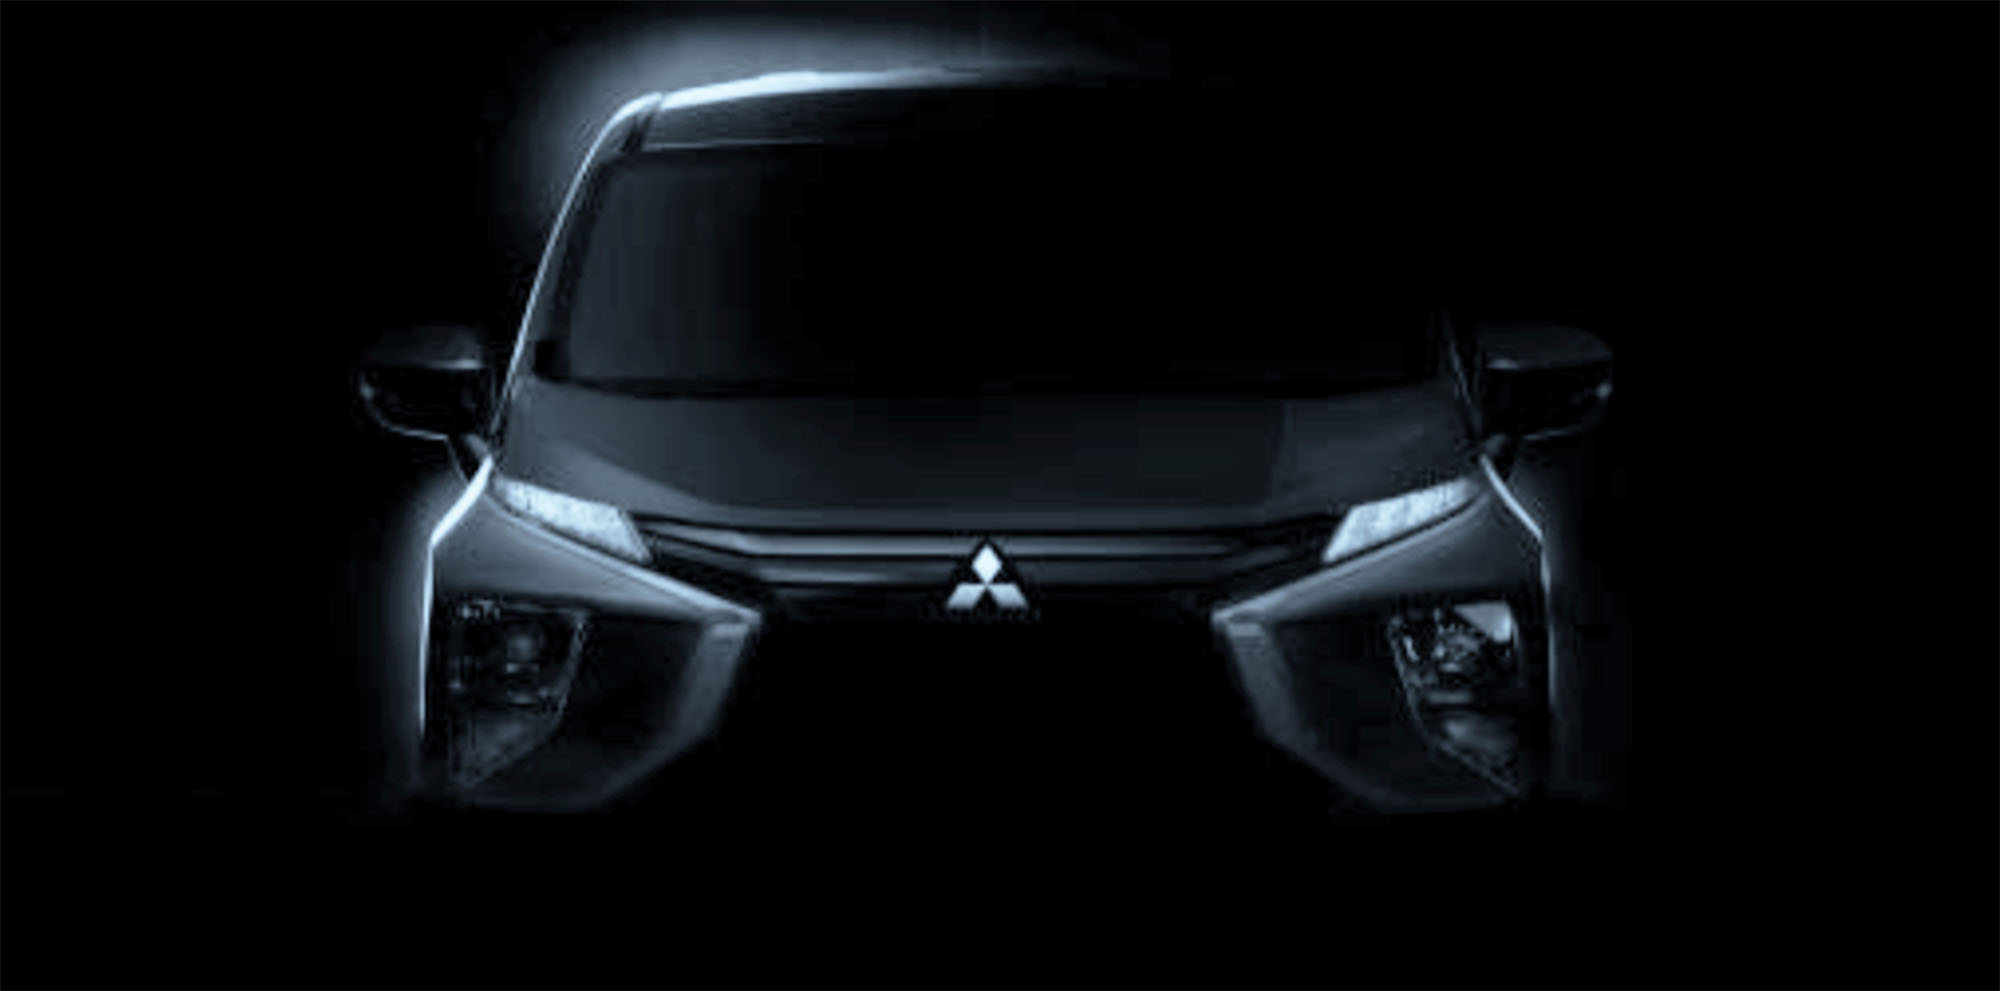 2018 Mitsubishi Expander people mover teased photos 